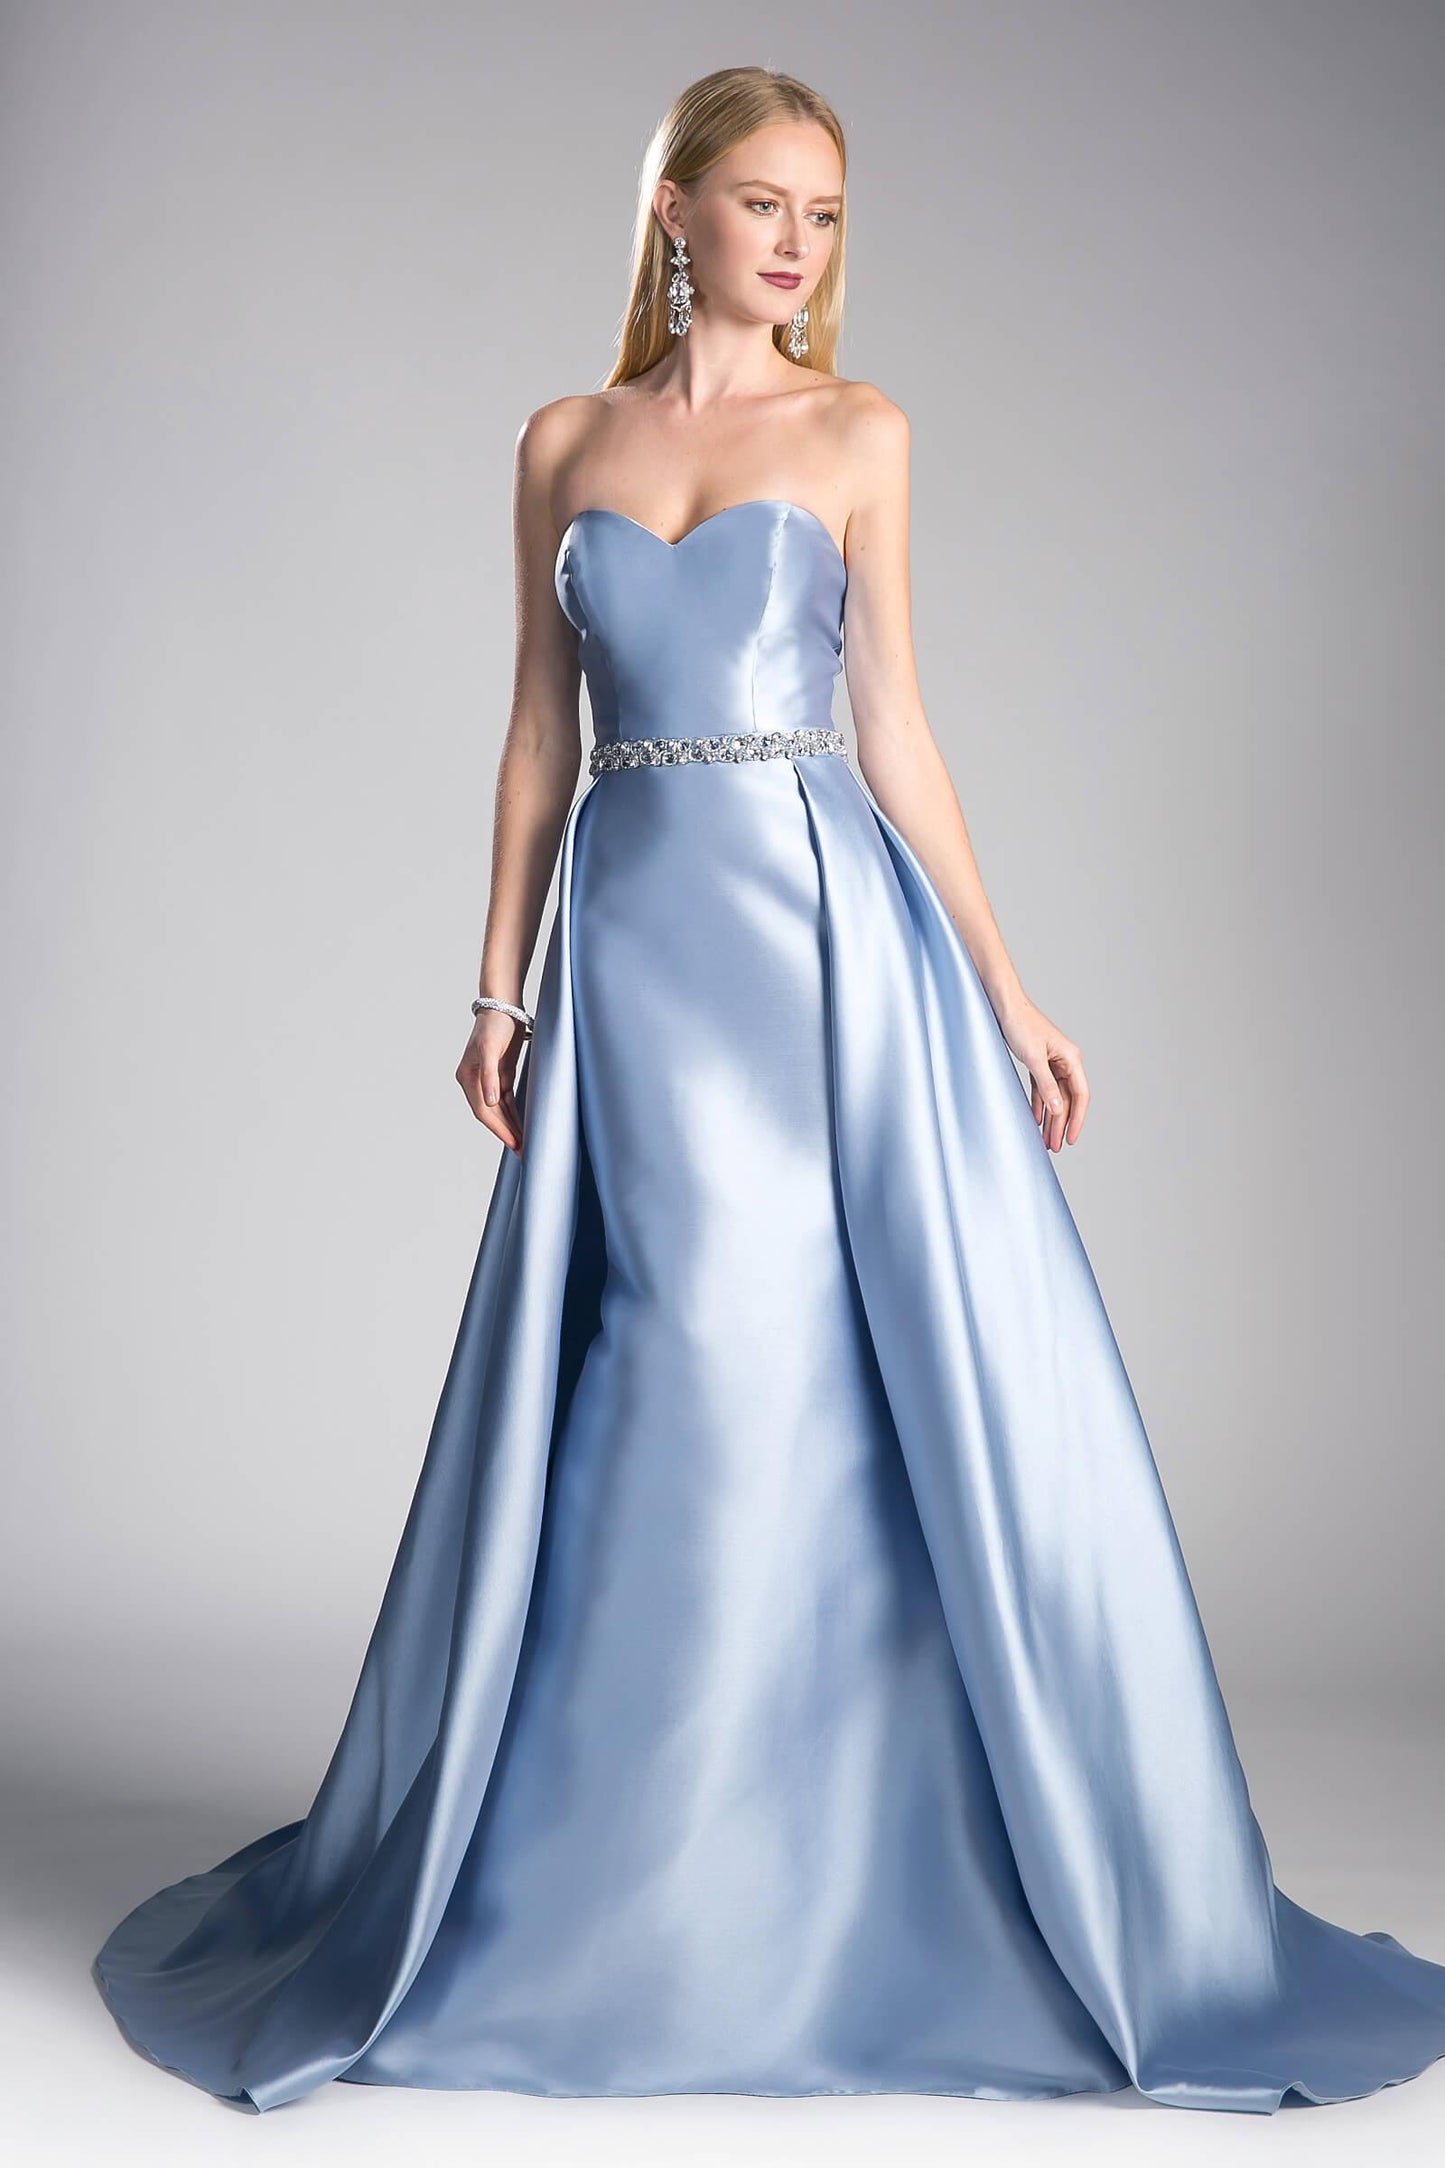 Long Formal Strapless Sweetheart Prom Gown - The Dress Outlet Cinderella Divine